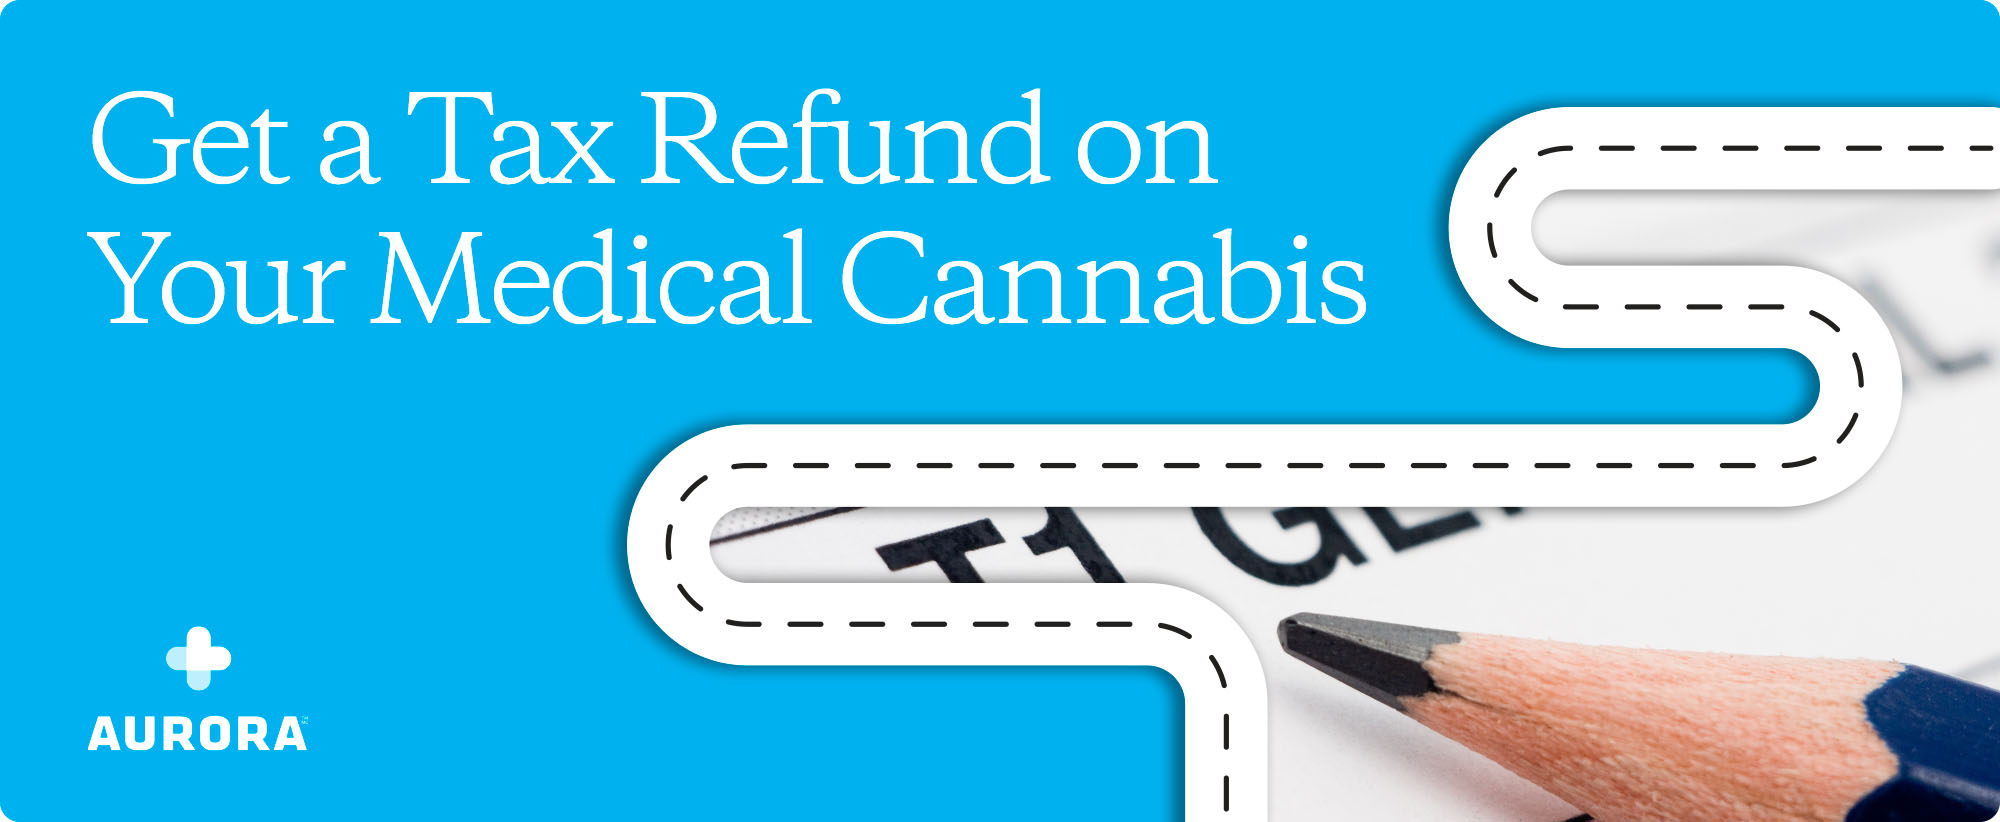 Claiming Medical Cannabis on Your Taxes